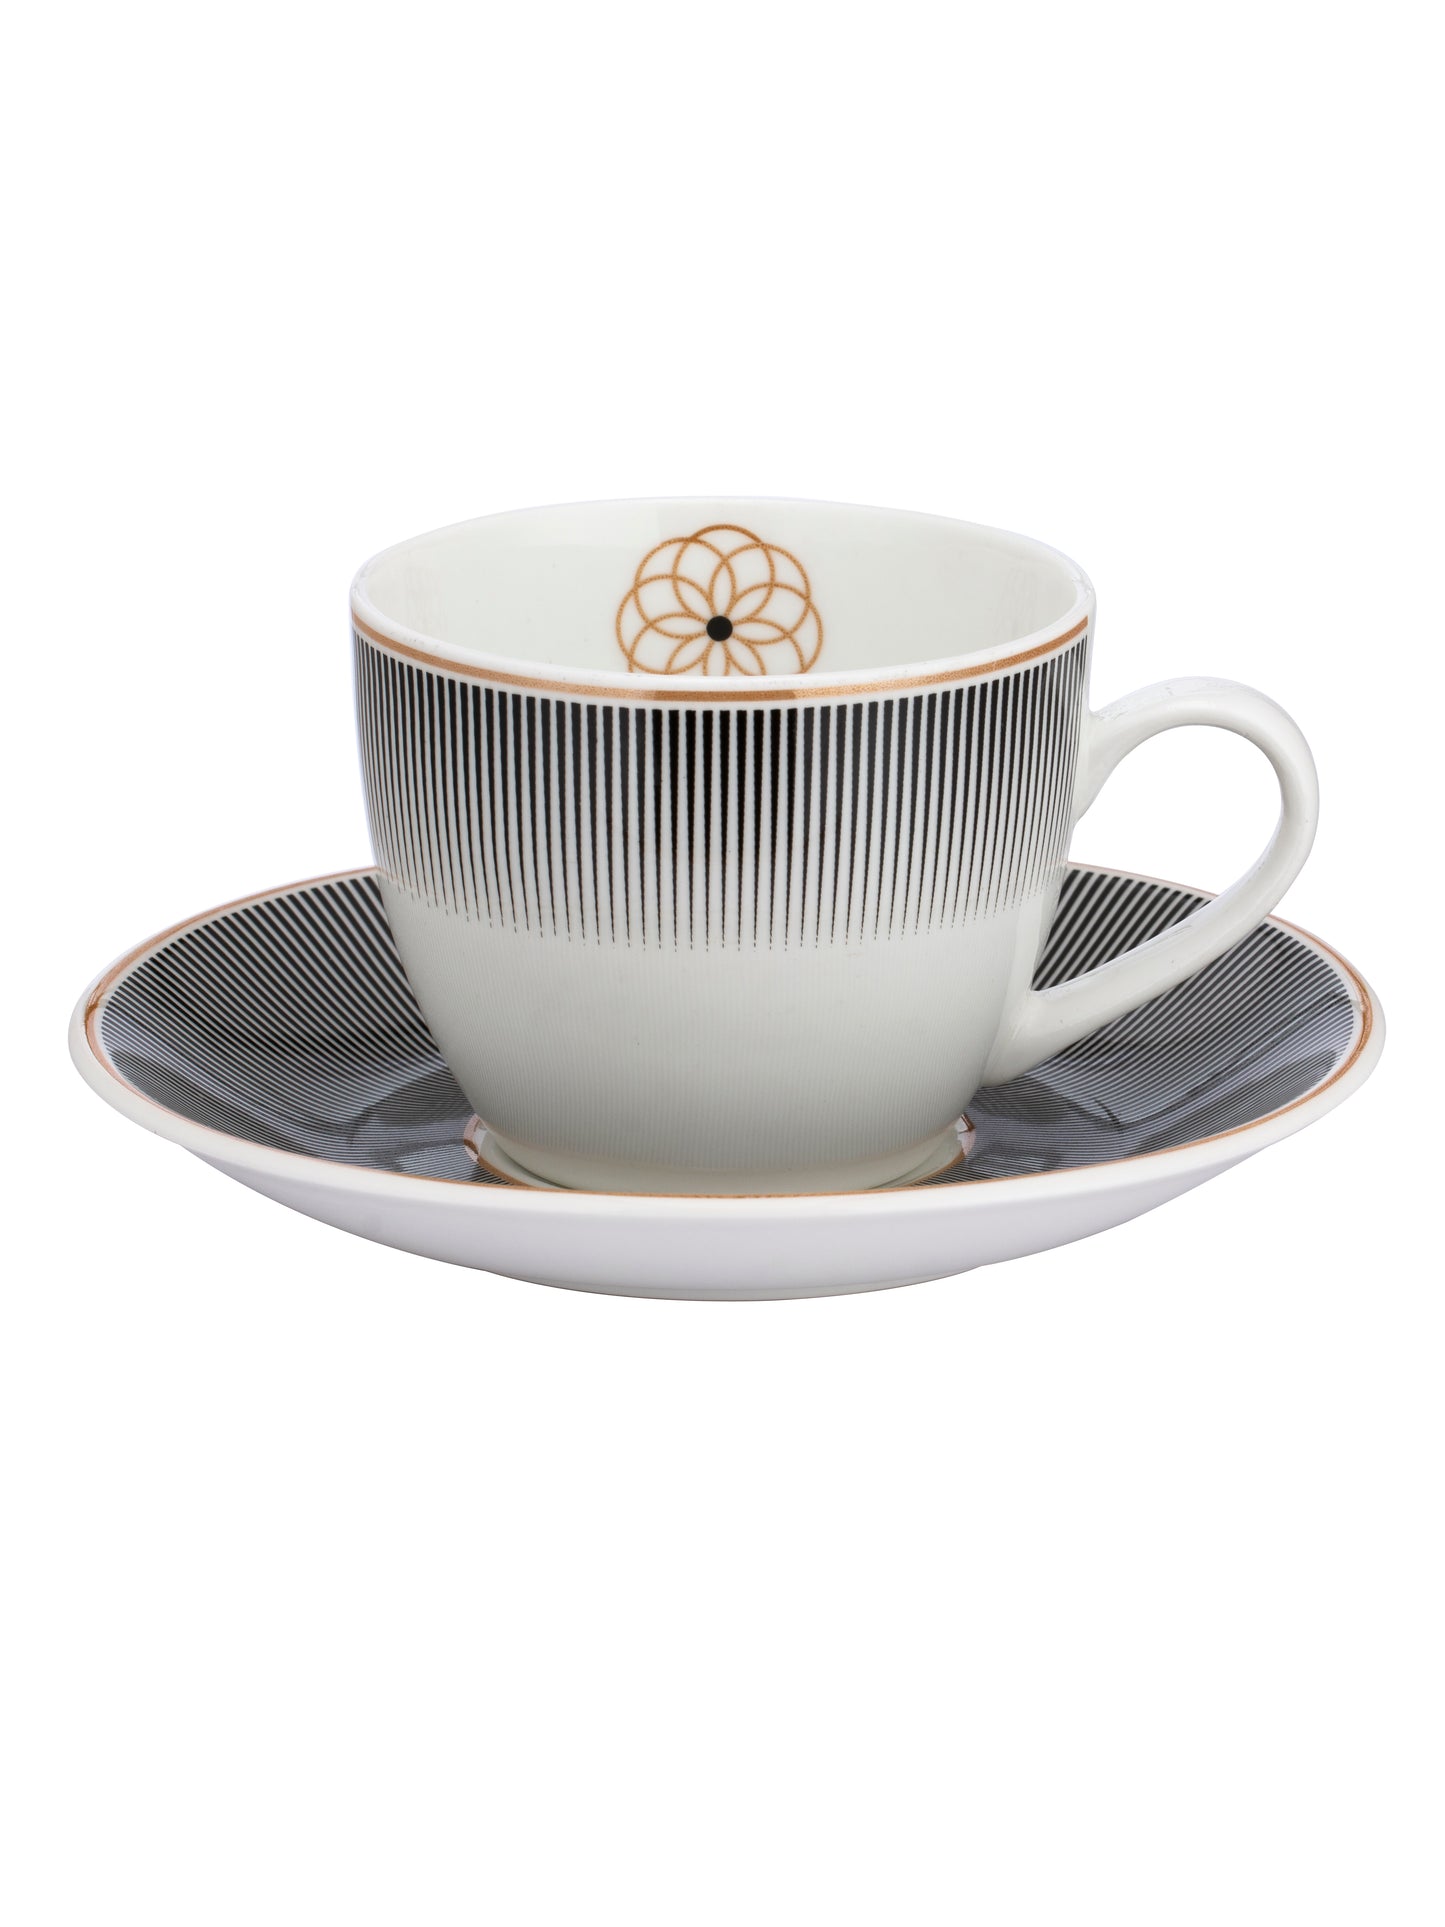 Cream Super Cup & Saucer, 210ml, Set of 12 (6 Cups + 6 Saucers) (S303)